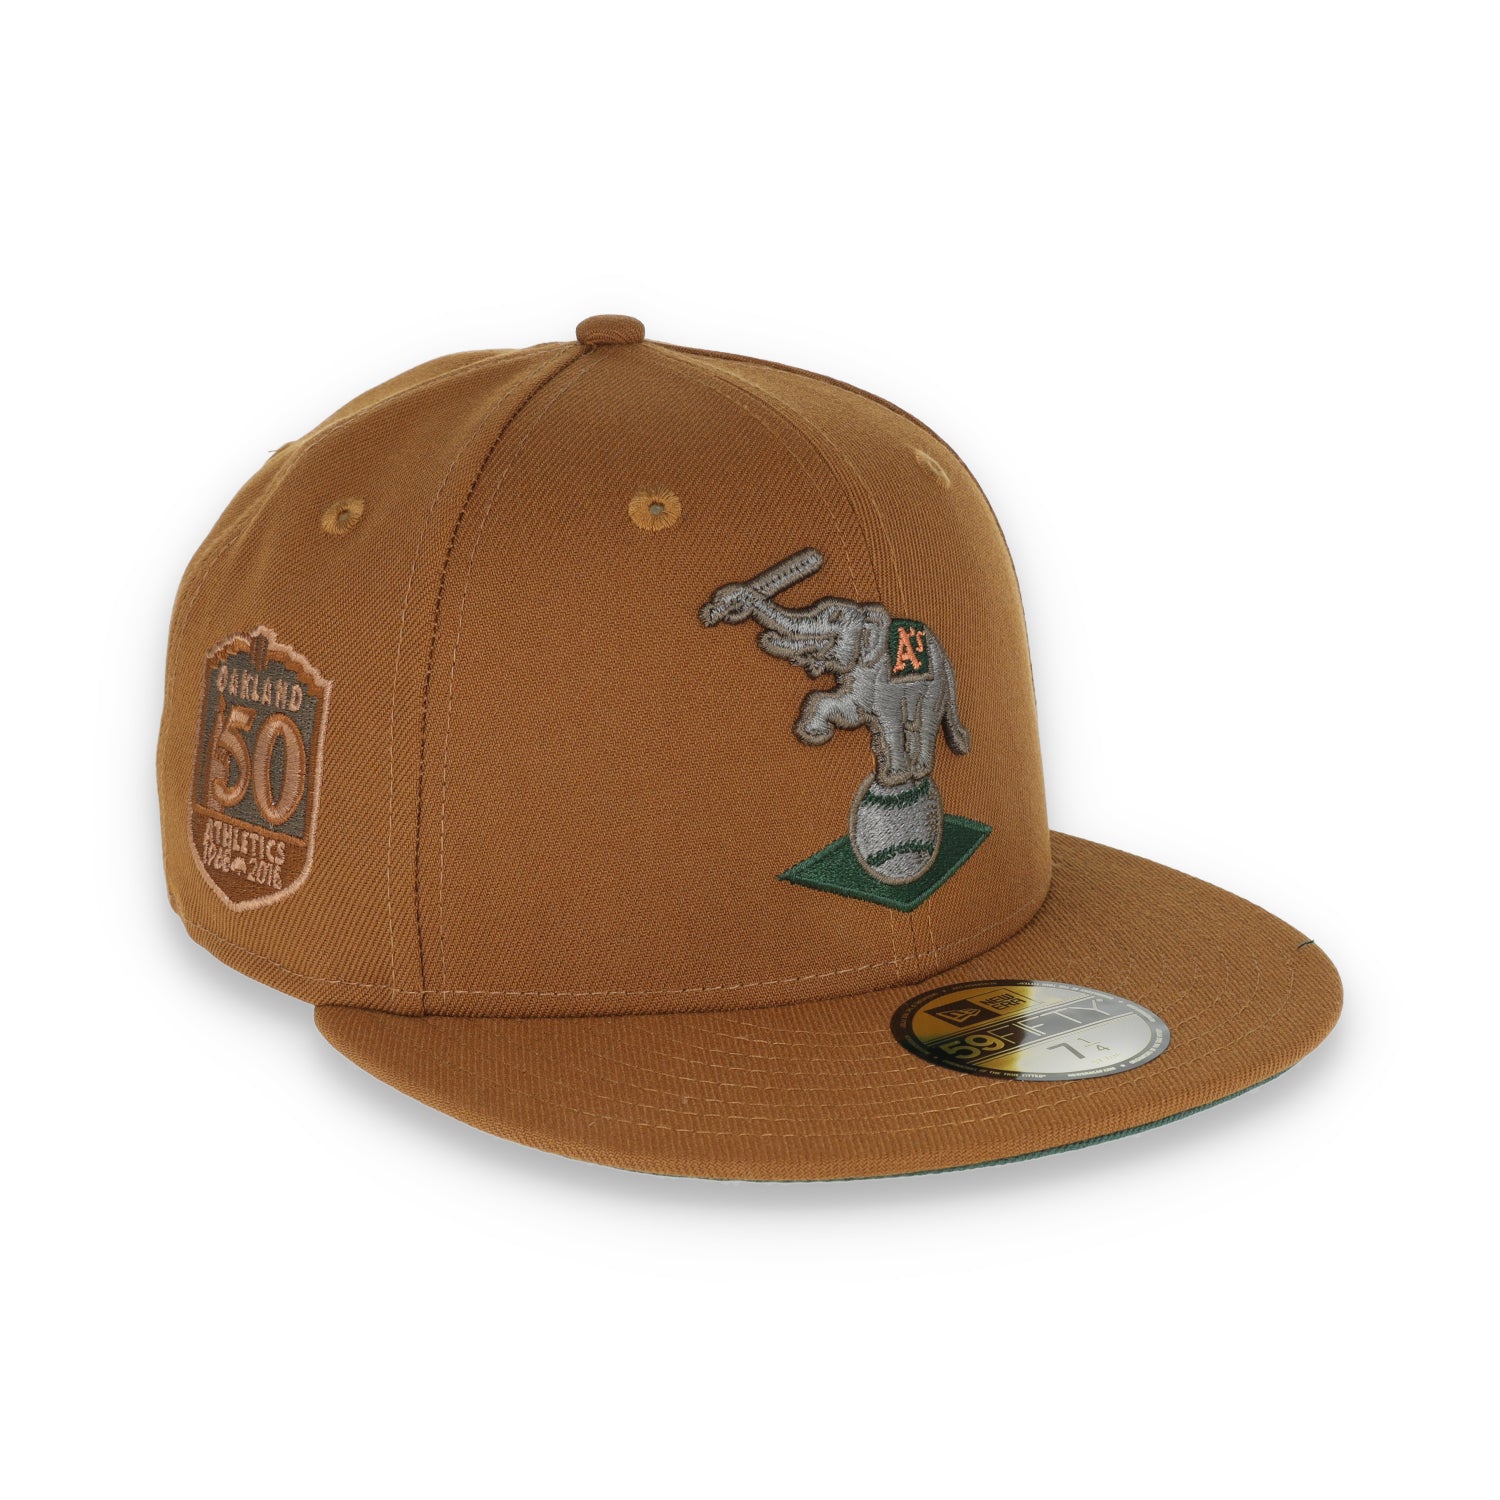 New Era Oakland Athletics 50th Anniversary Patch 59FIFTY Fitted-Peanut/DK Green